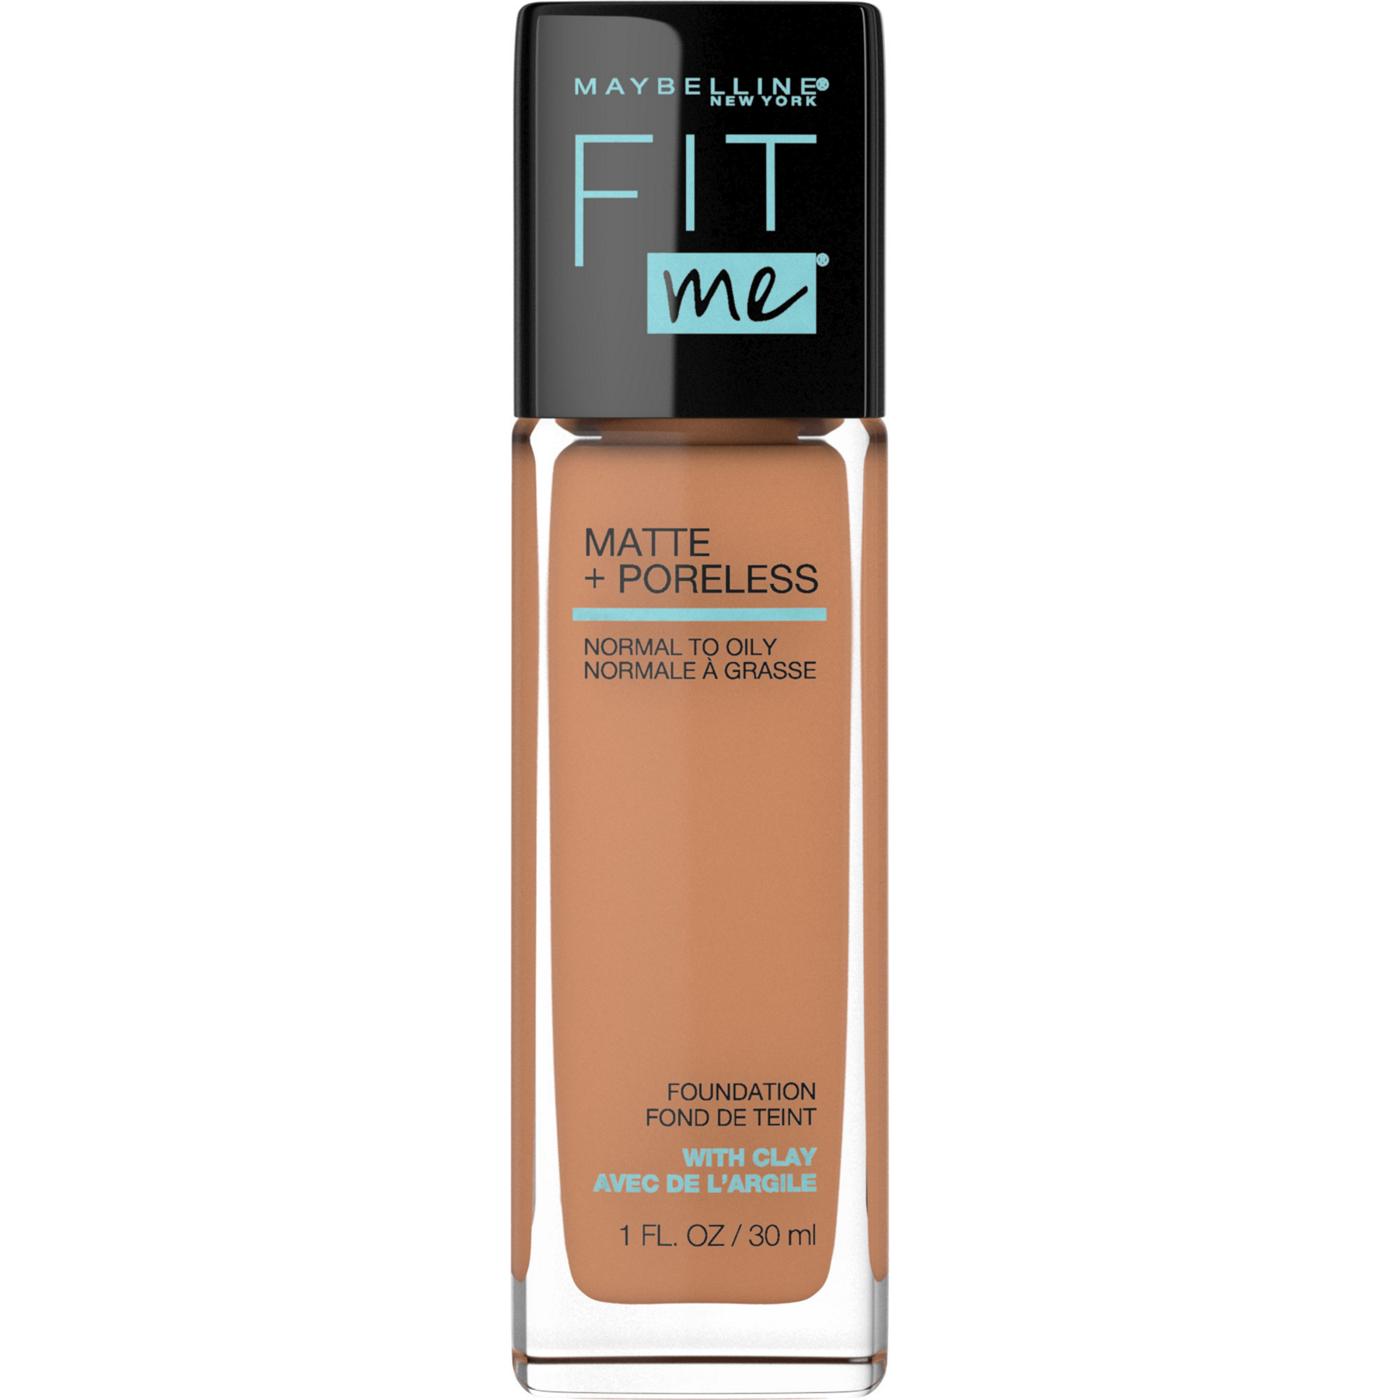 Maybelline Fit Me Matte + Poreless Liquid Foundation - Toffee; image 1 of 2